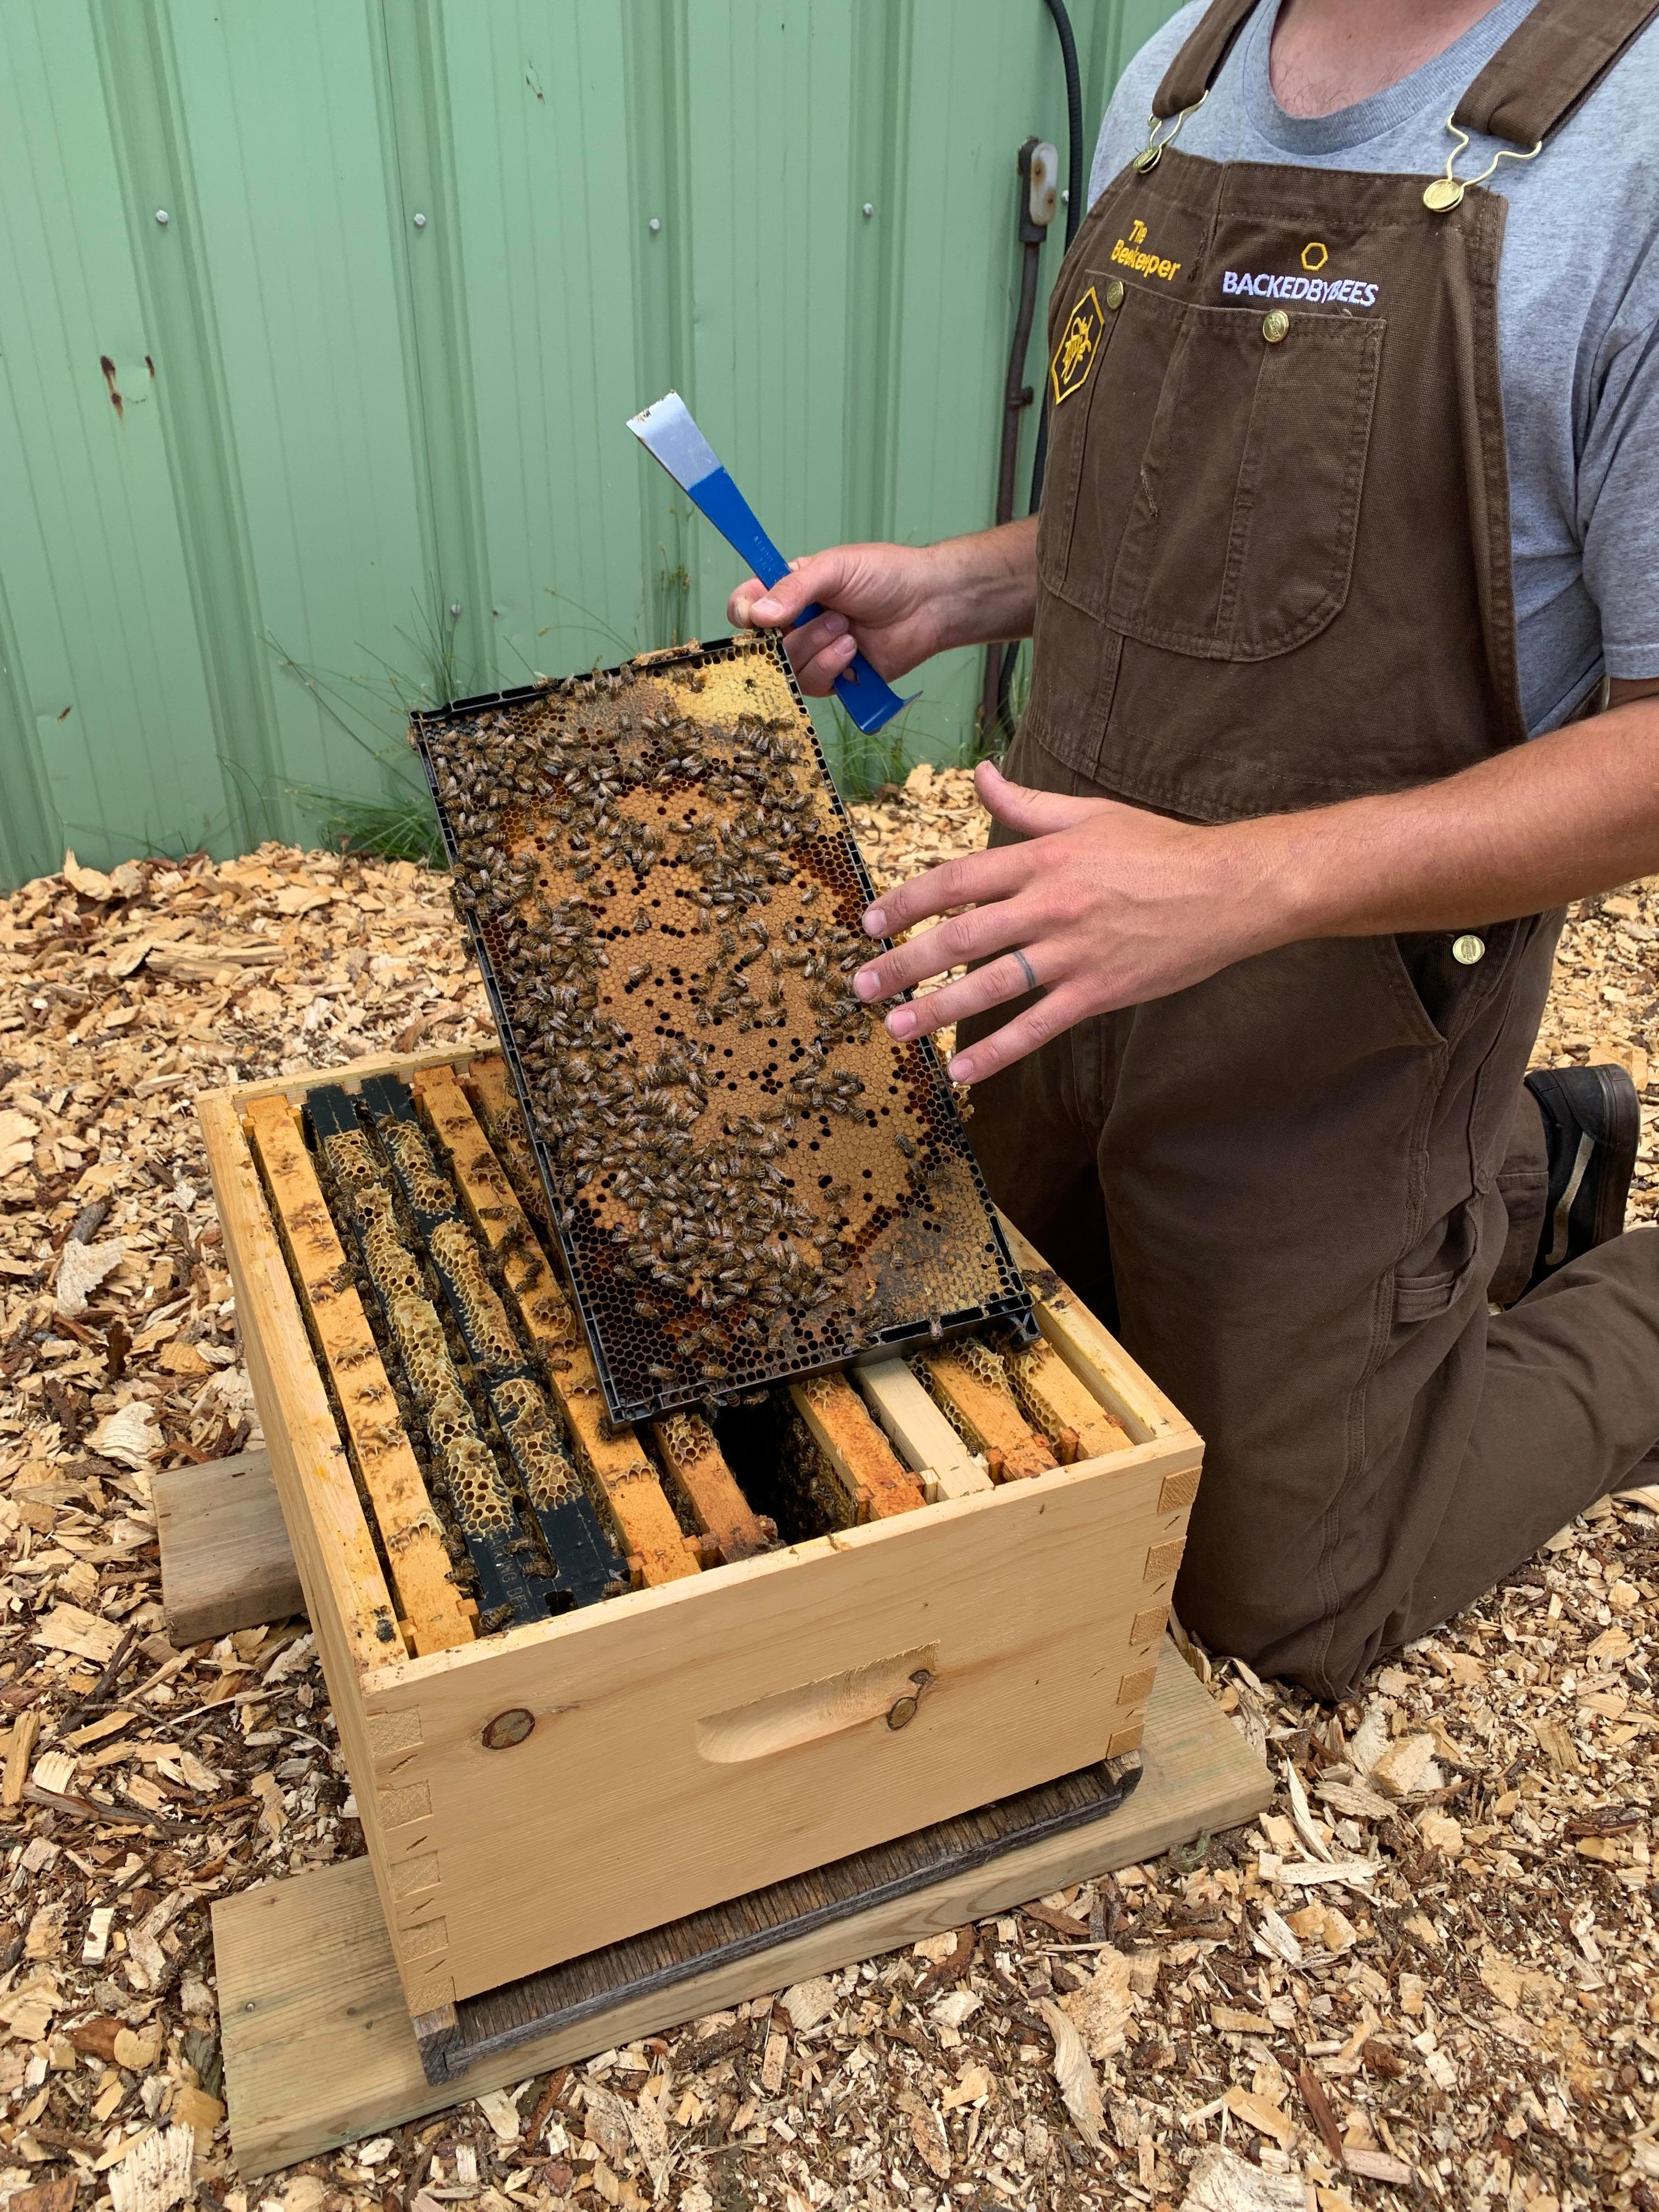 "Beekeeper showing the inside of a bee hive with bees on a frame"